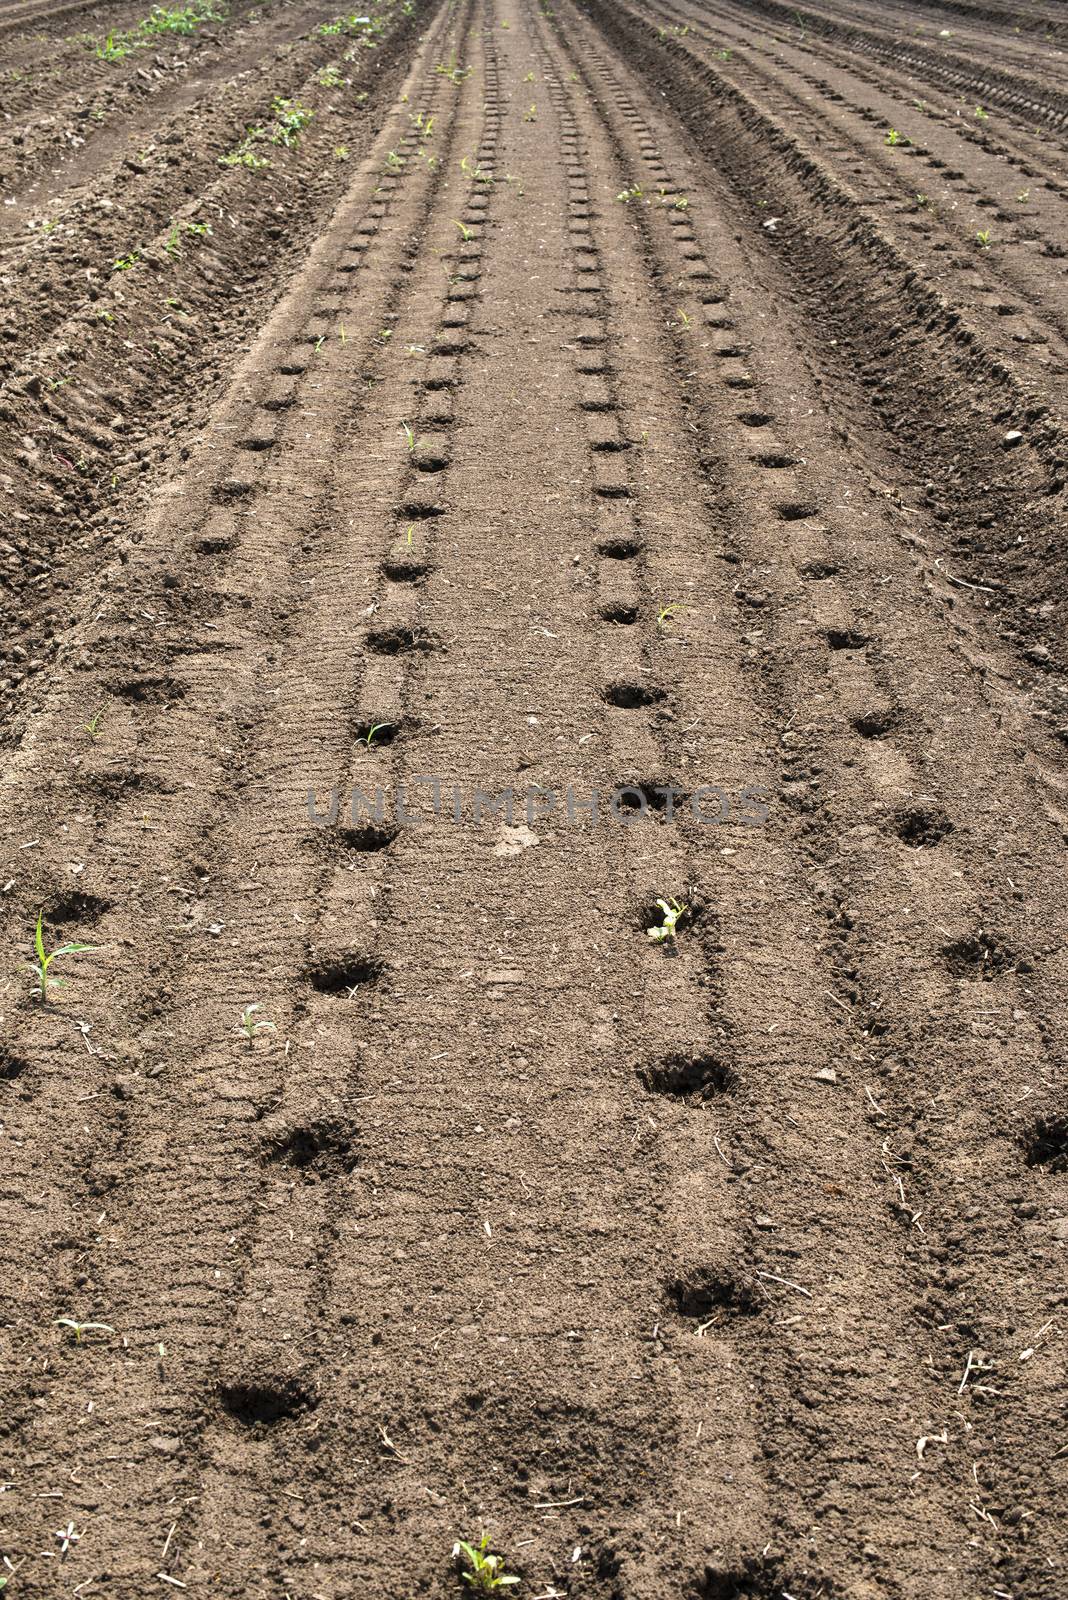 Many holes prepared for planting. Agriculture new plants concept.